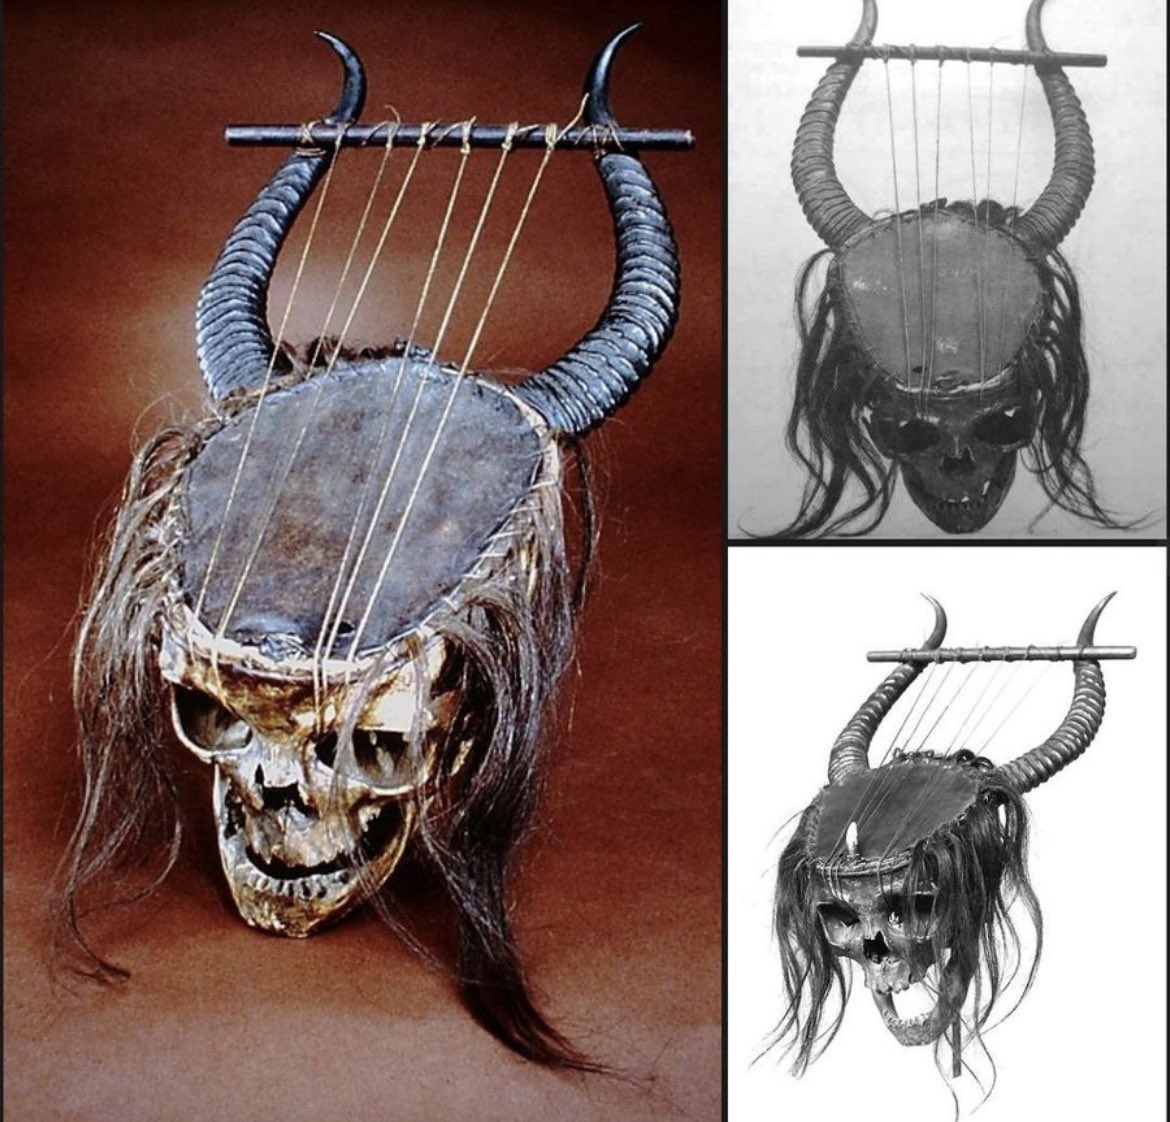 A Central African lyre made from a human skull, antelope horns, skin, gut, and hair.